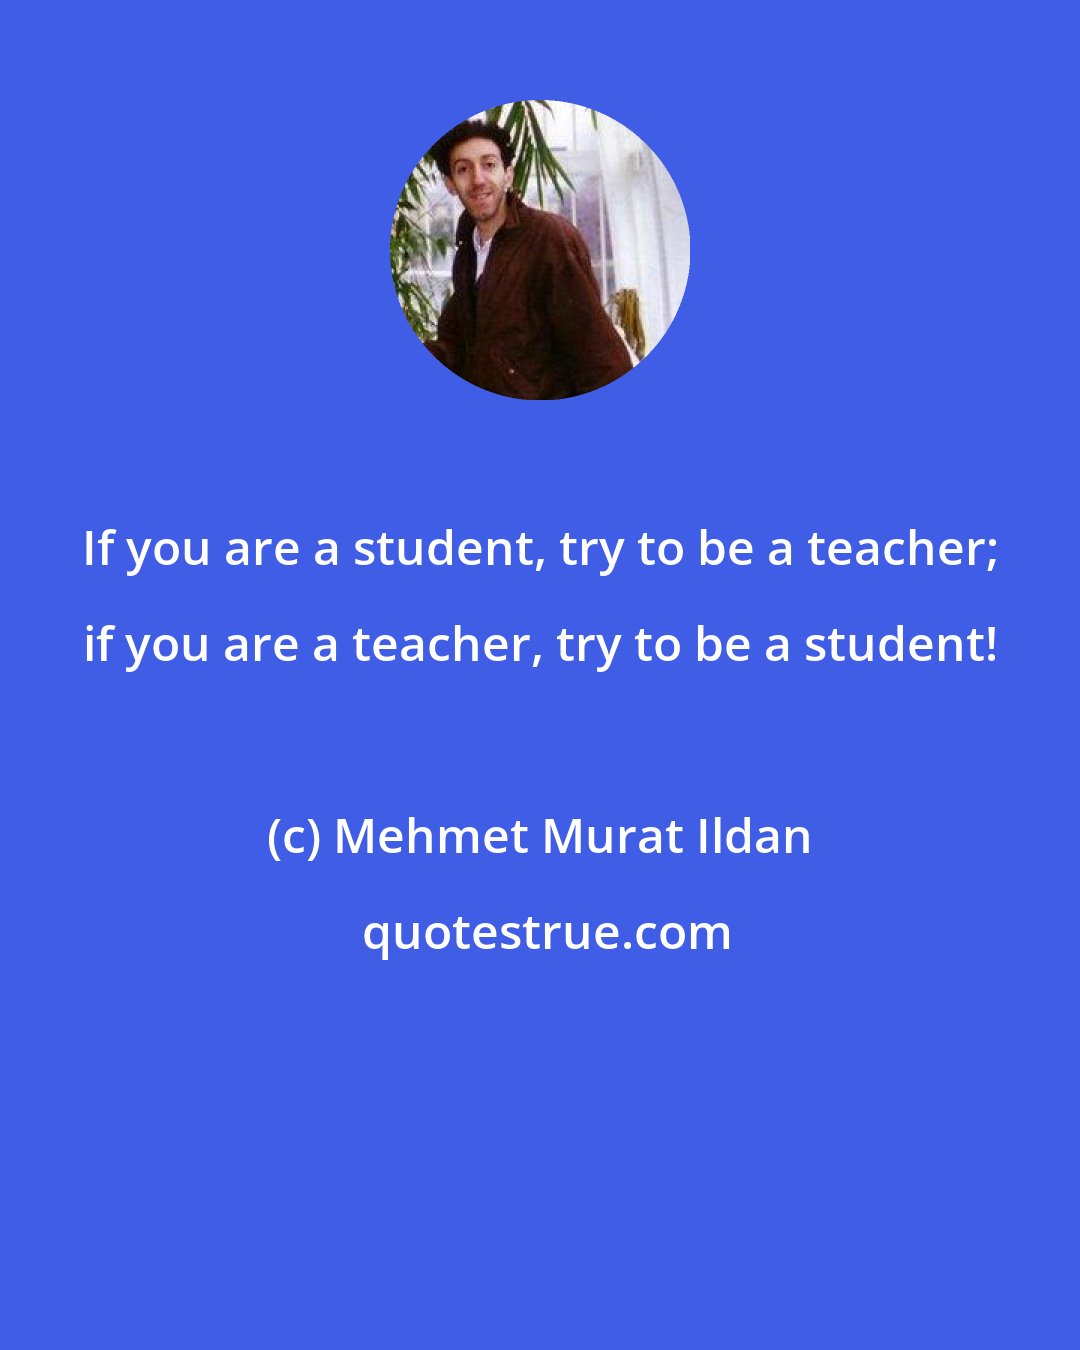 Mehmet Murat Ildan: If you are a student, try to be a teacher; if you are a teacher, try to be a student!